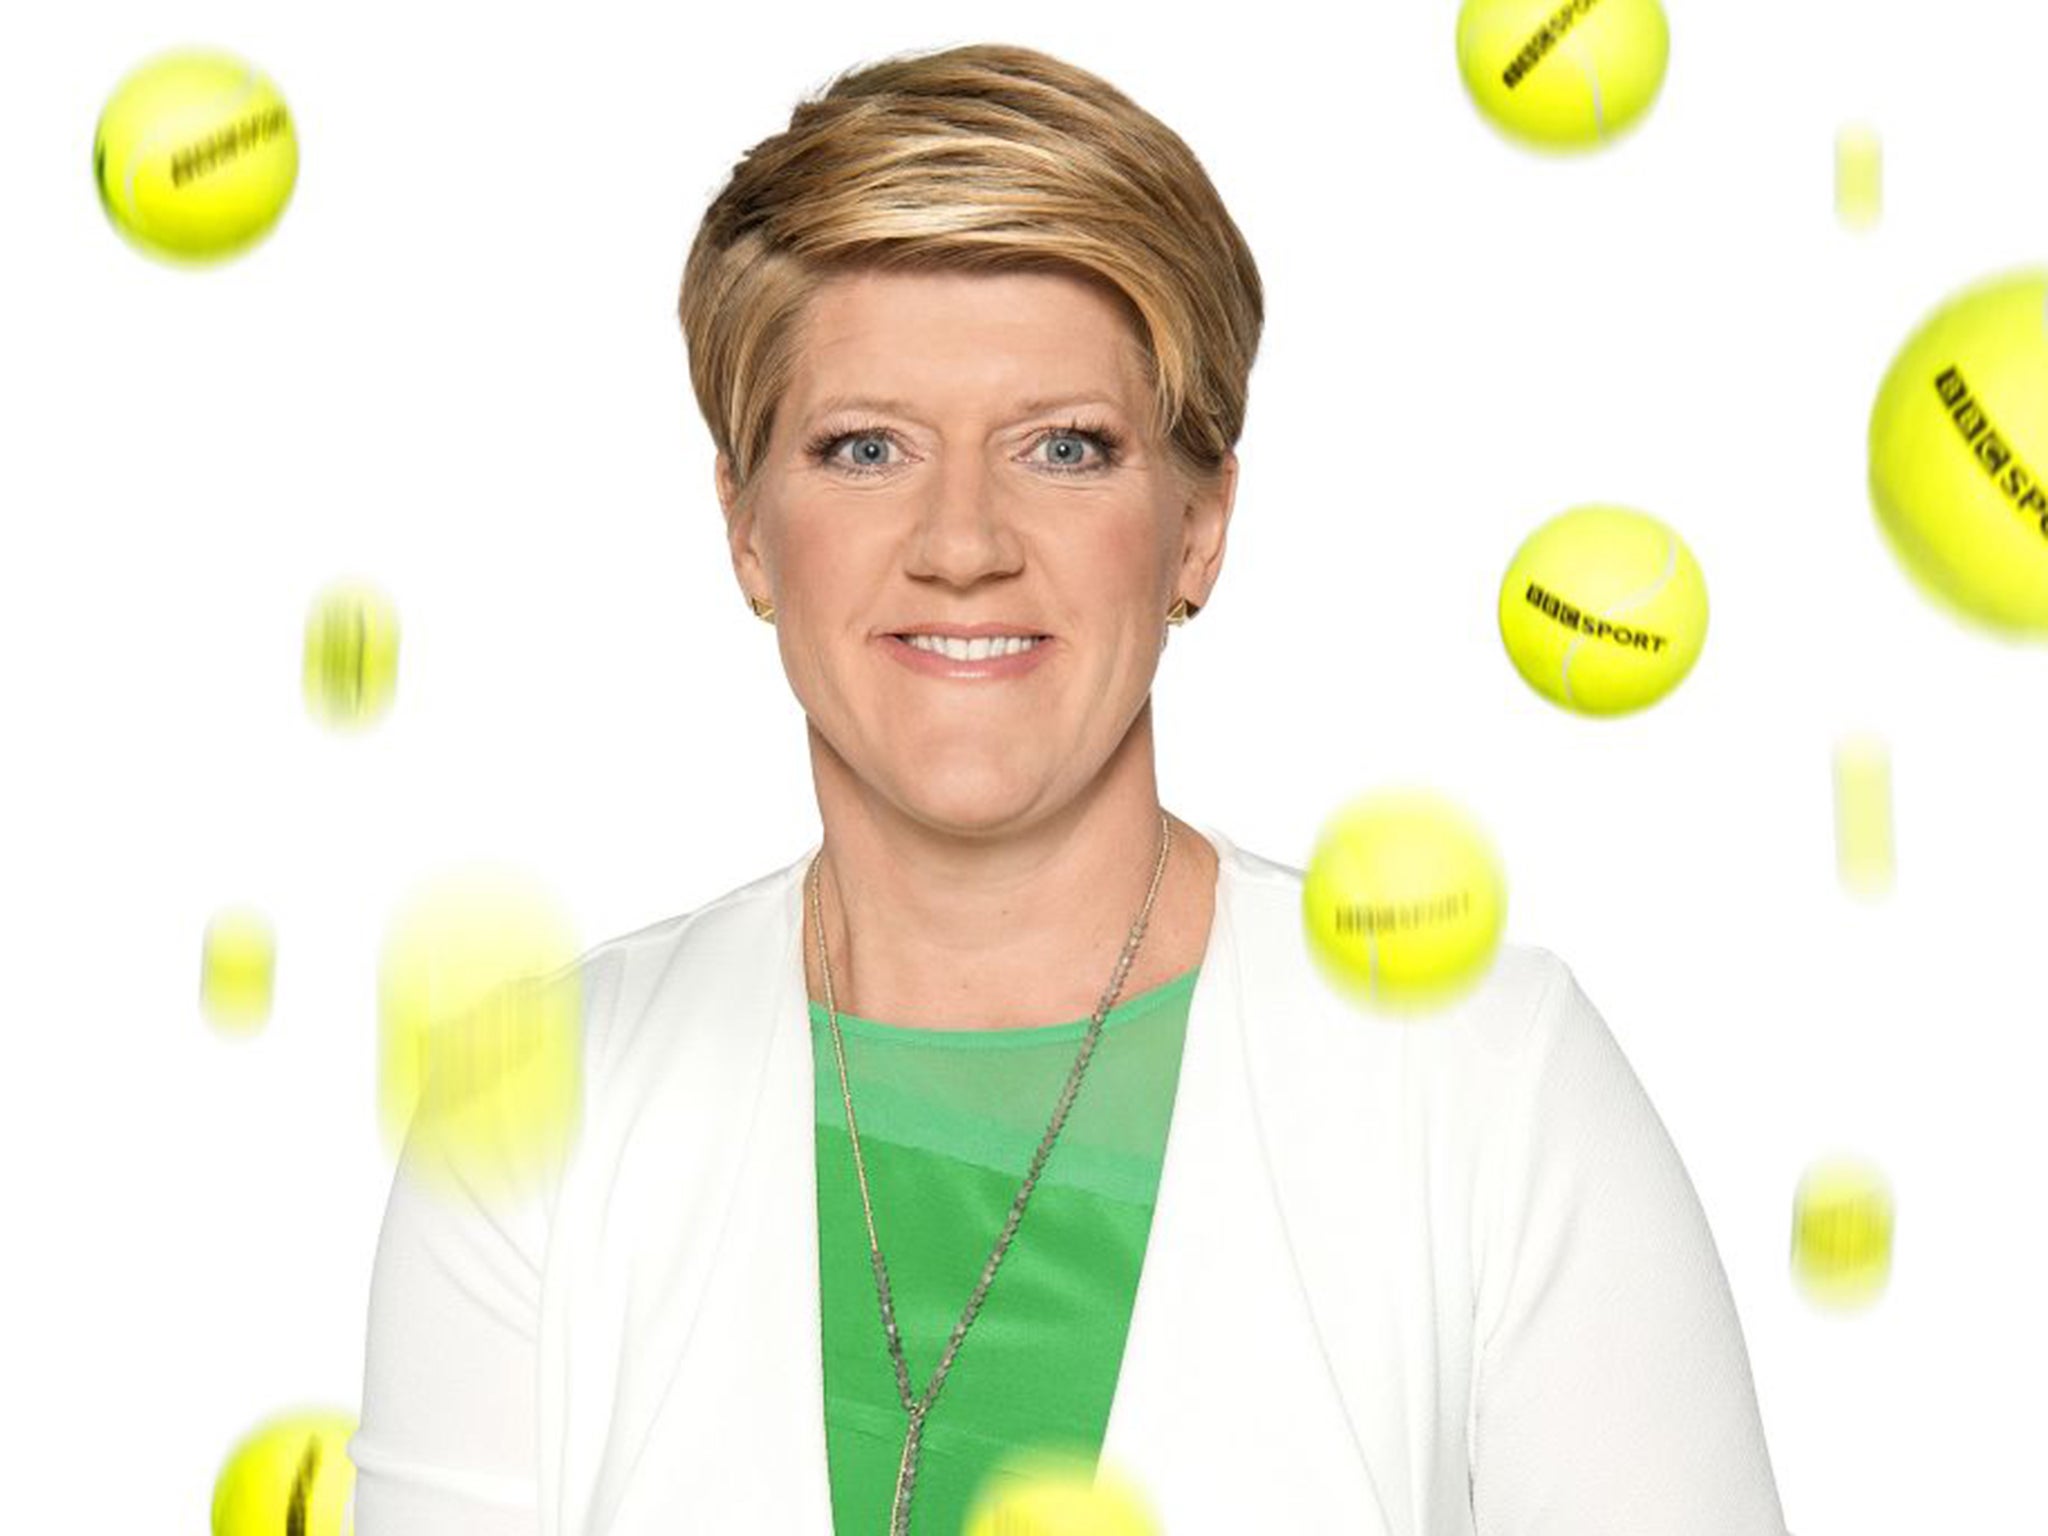 Court out: Clare Balding's 'Wimbledon 2Day' is distinctly lacking in something - tennis